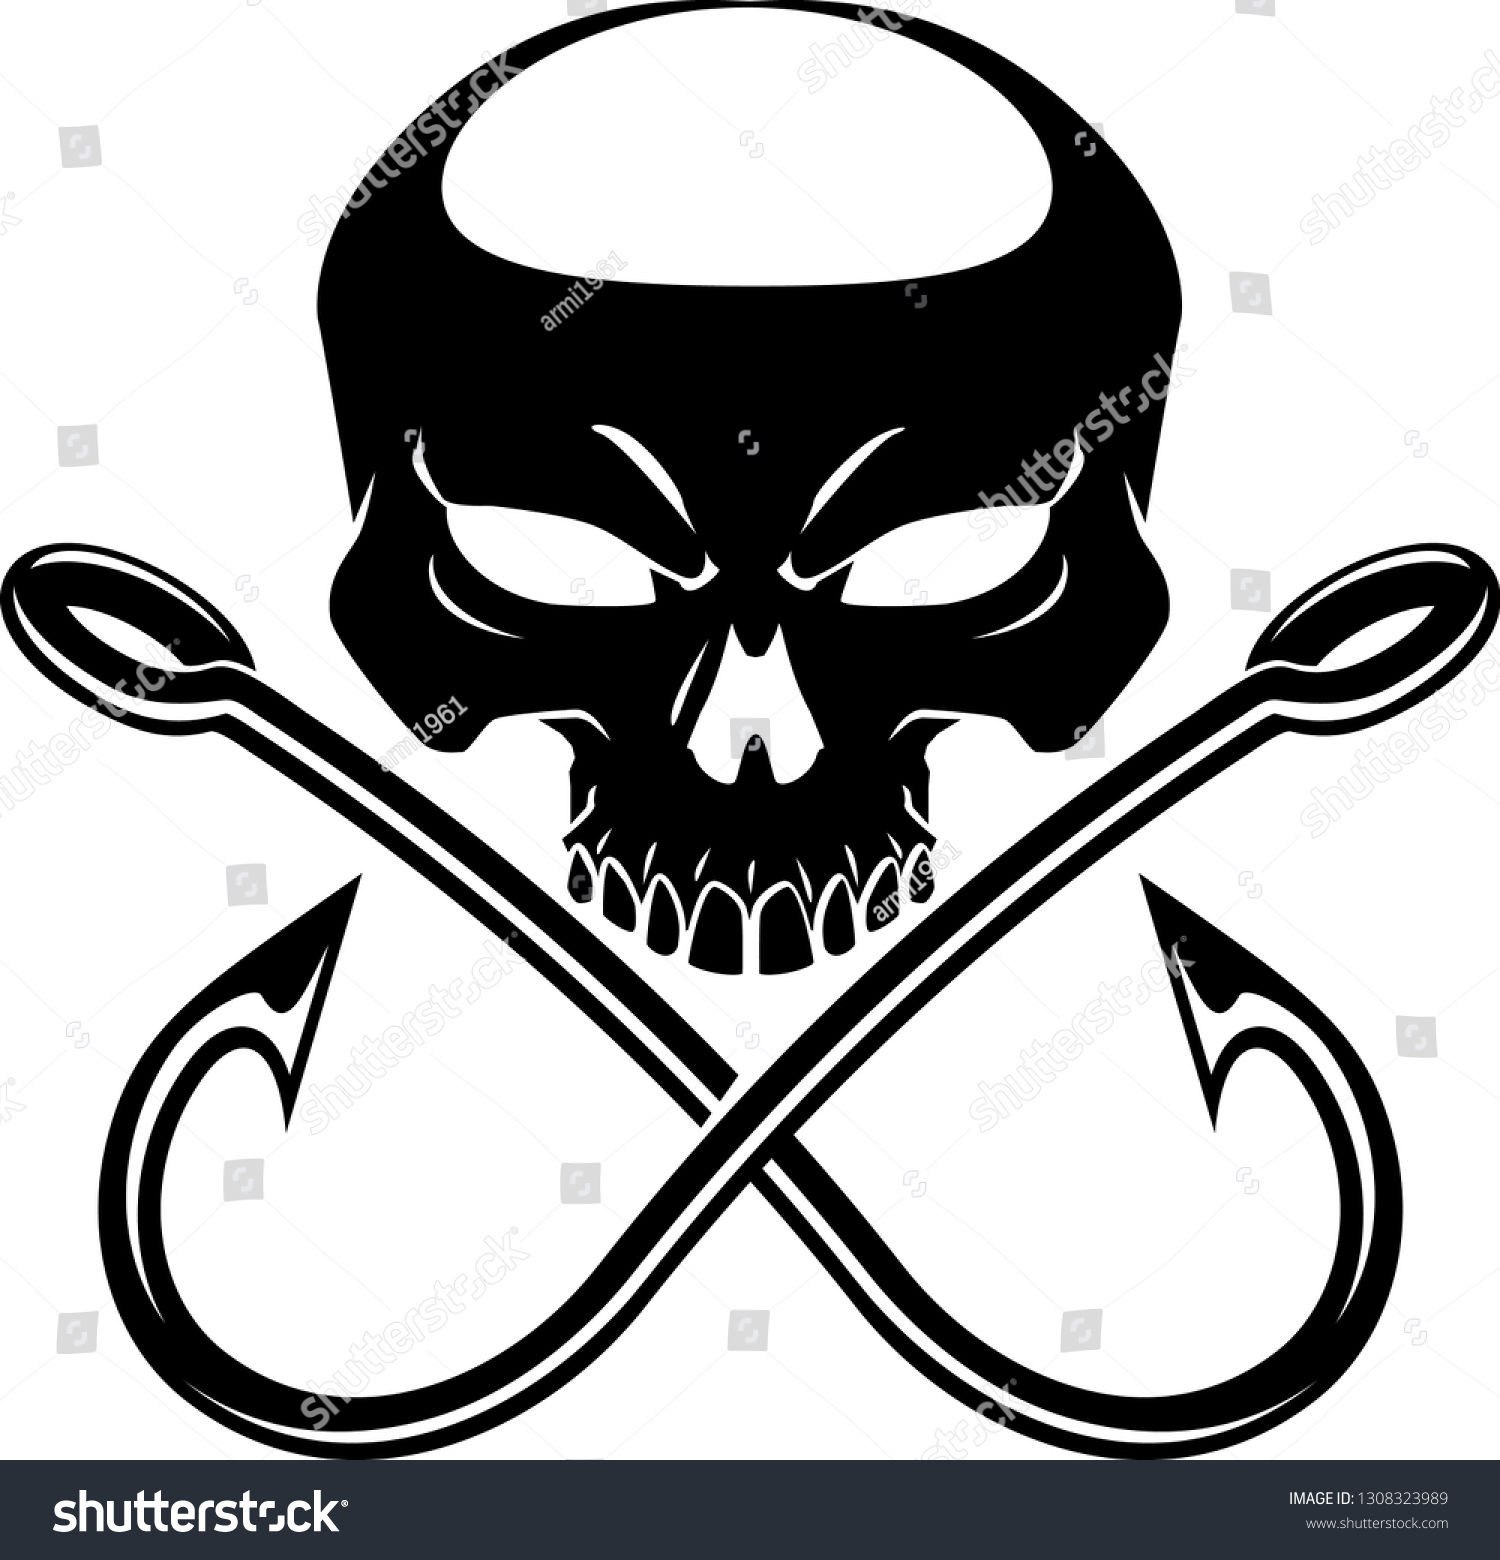 SVG of human skull with crossing fishing hooks svg